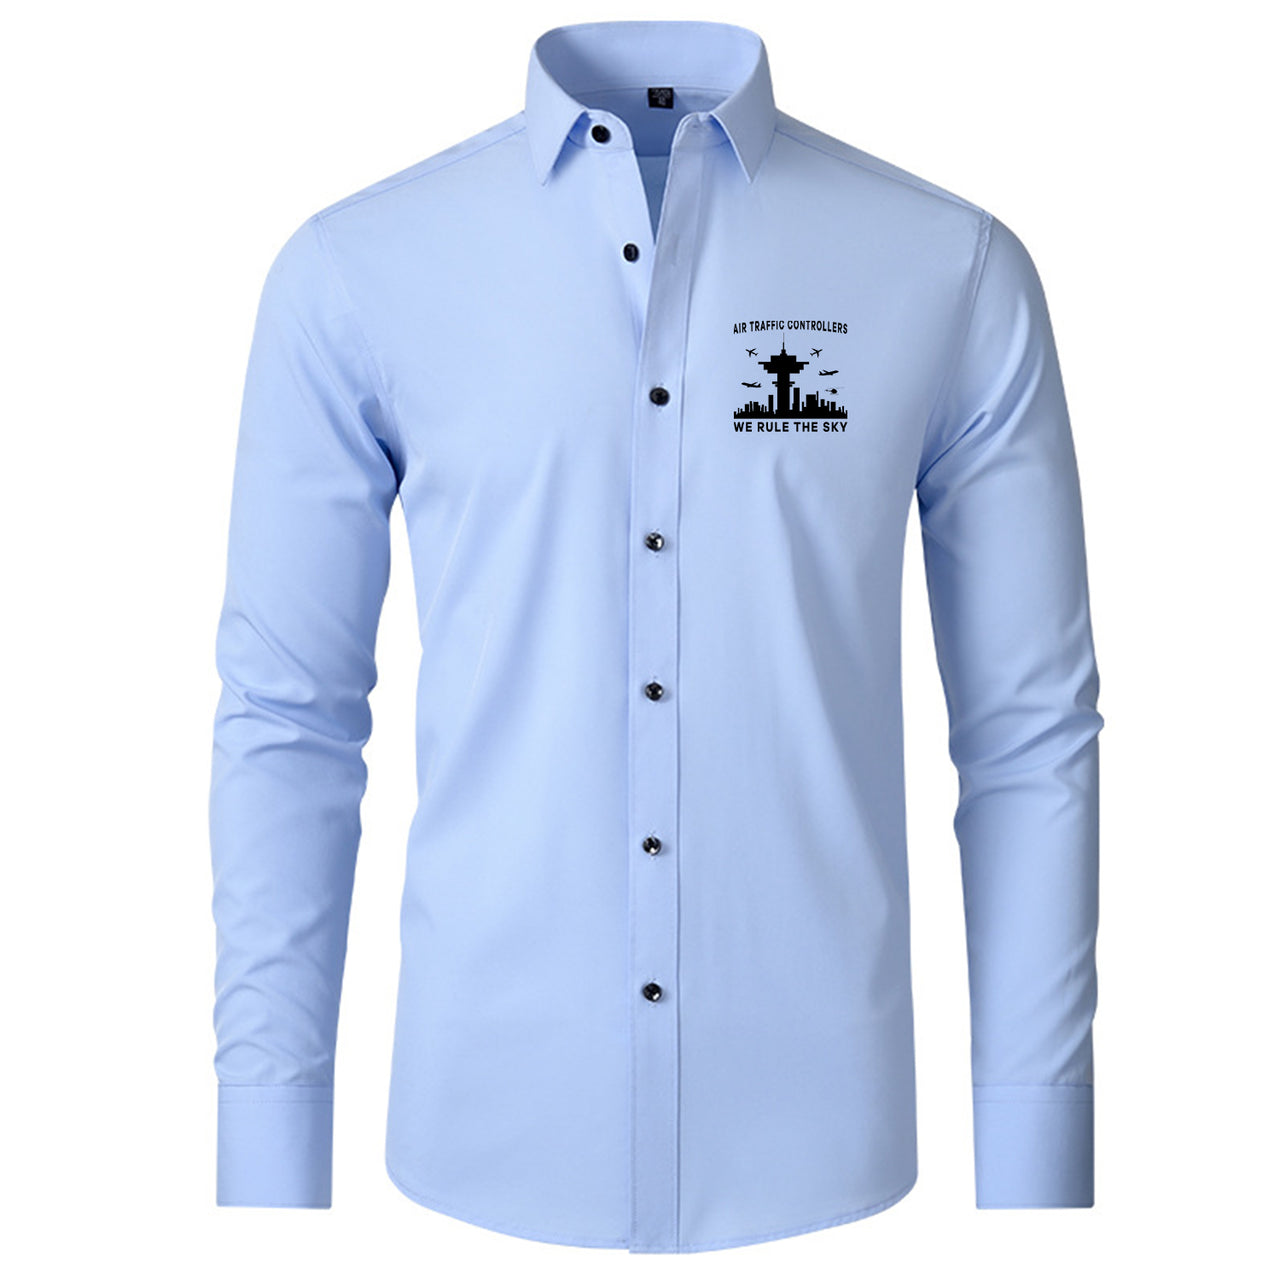 Air Traffic Controllers - We Rule The Sky Designed Long Sleeve Shirts